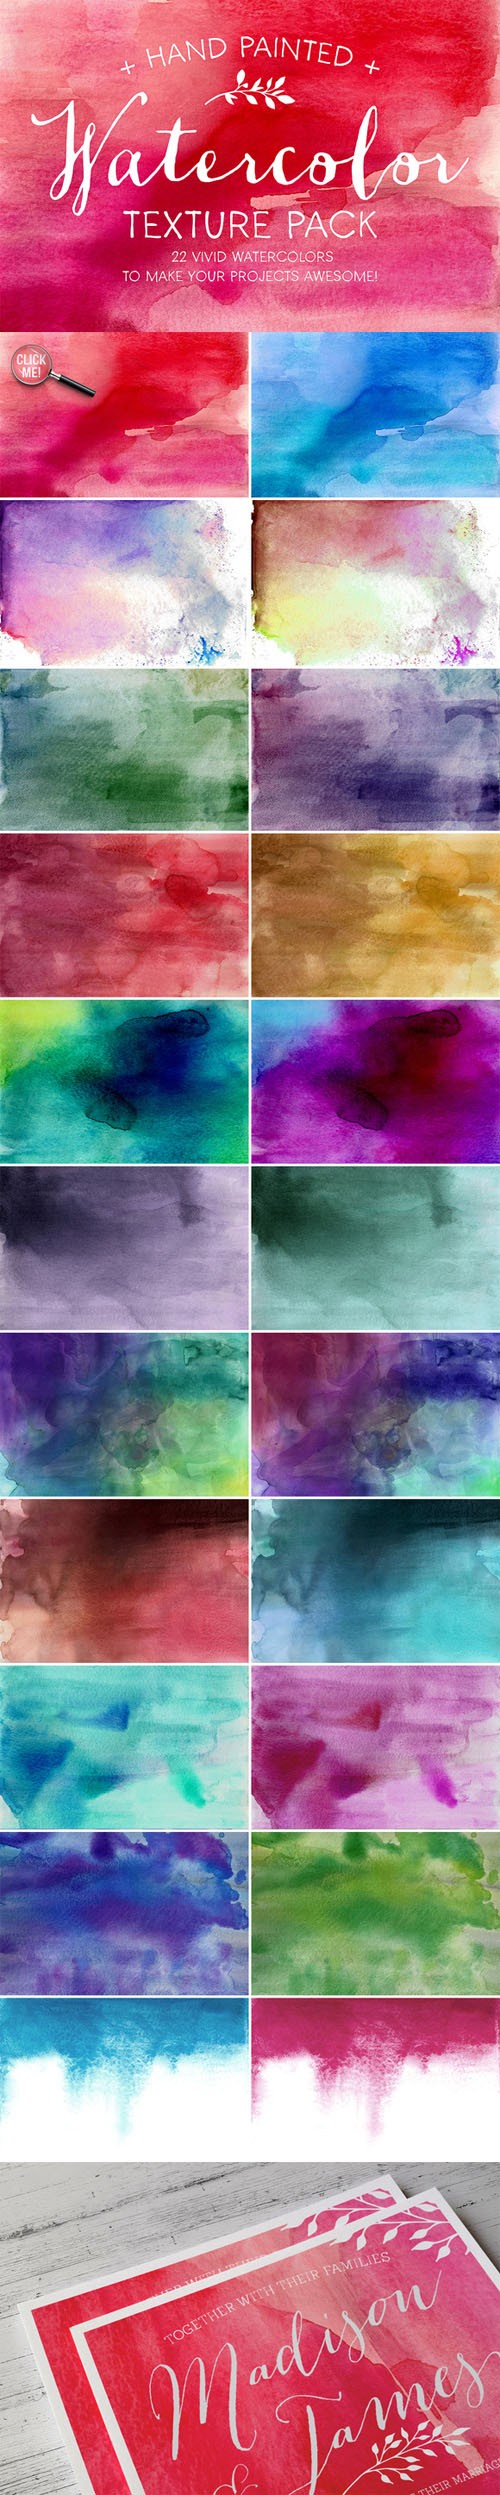 Creativemarket - The Watercolor Texture Pack 74570